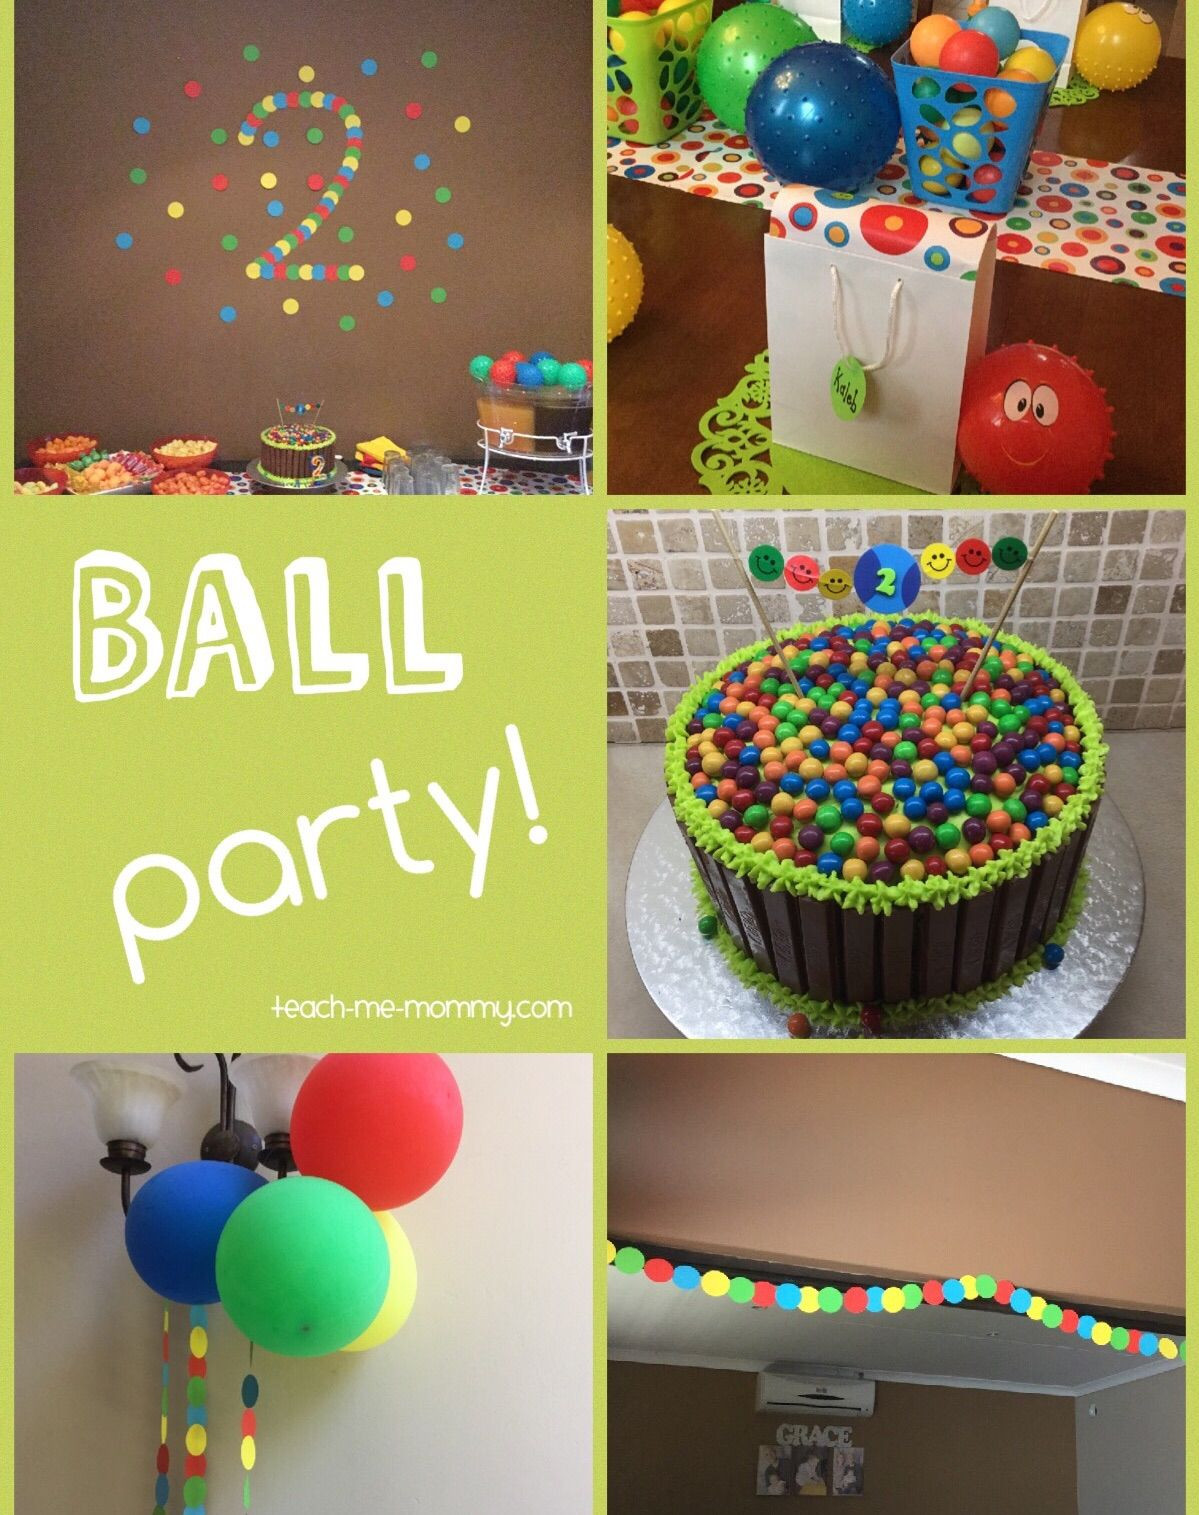 2 Year Old Birthday Party
 Ball Themed Party for a 2 Year Old Teach Me Mommy